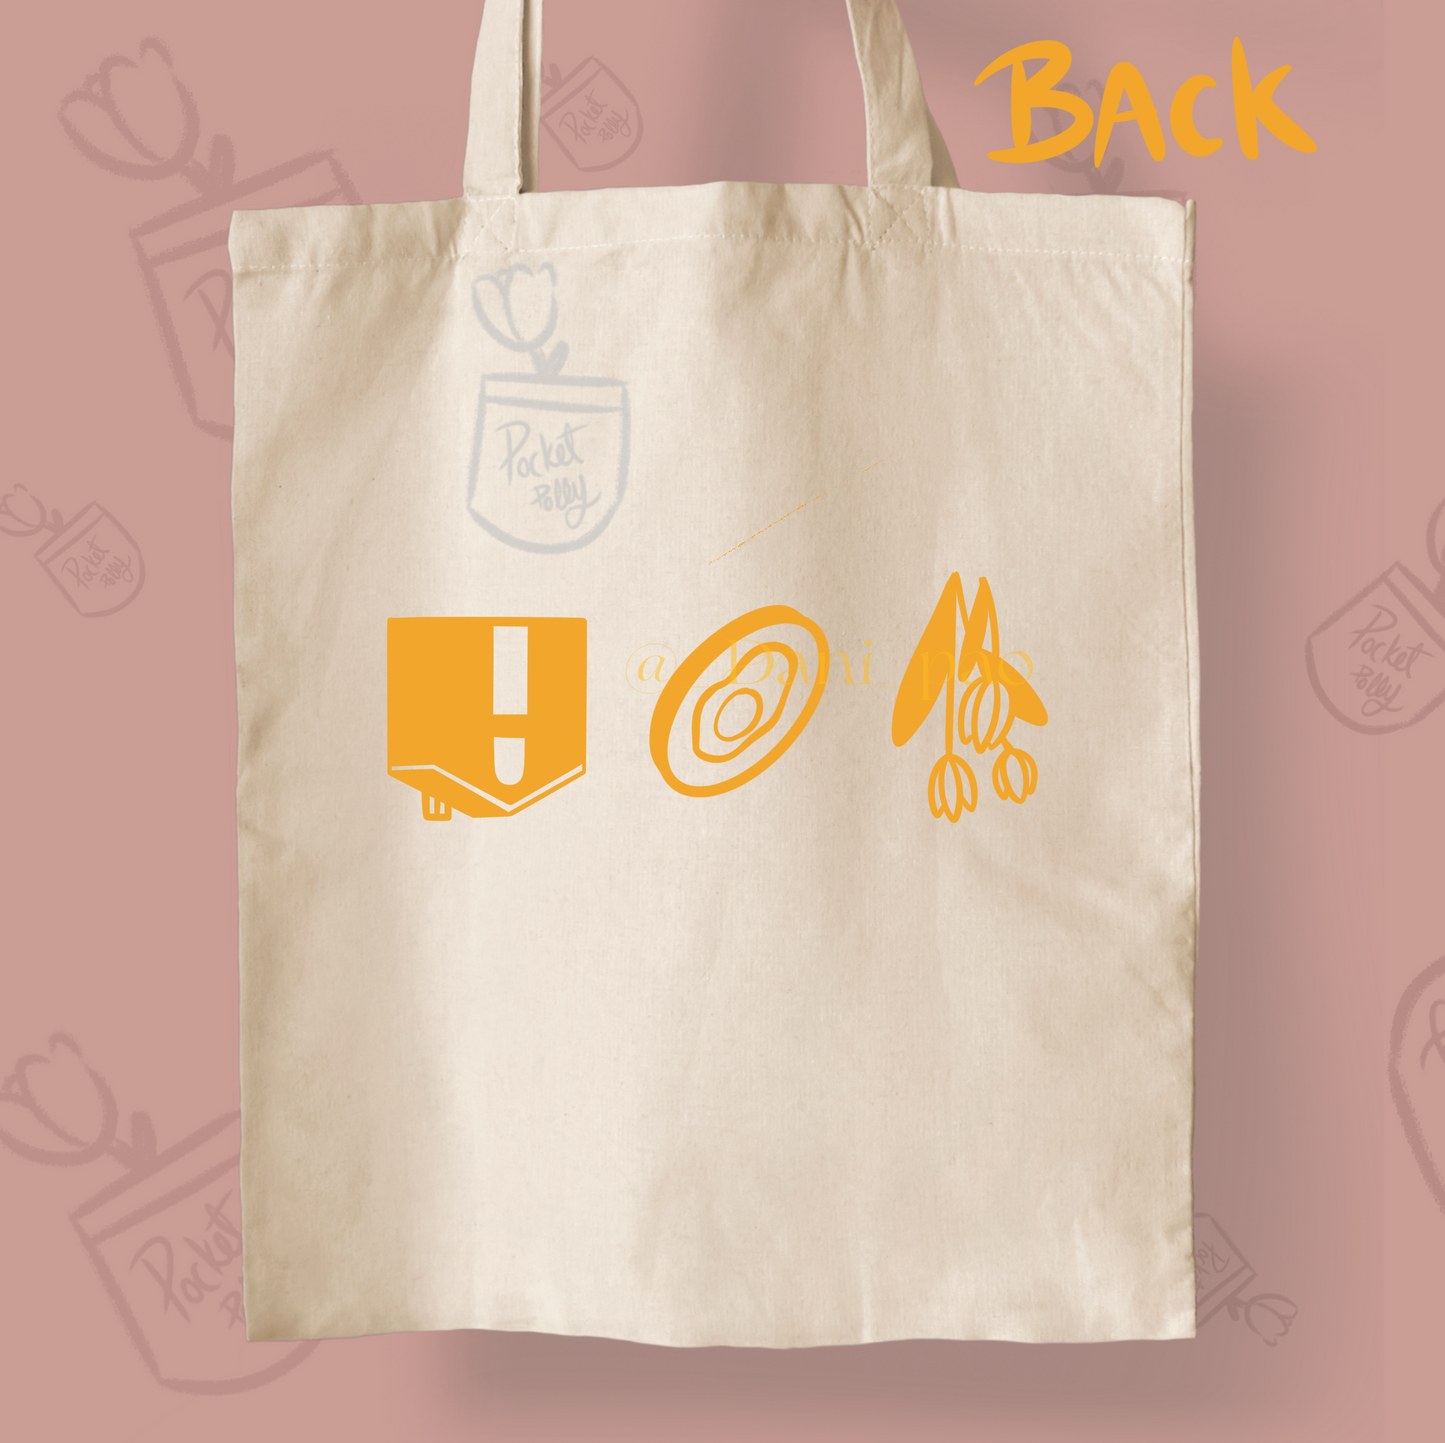 Welcome to harry's house Tote bag